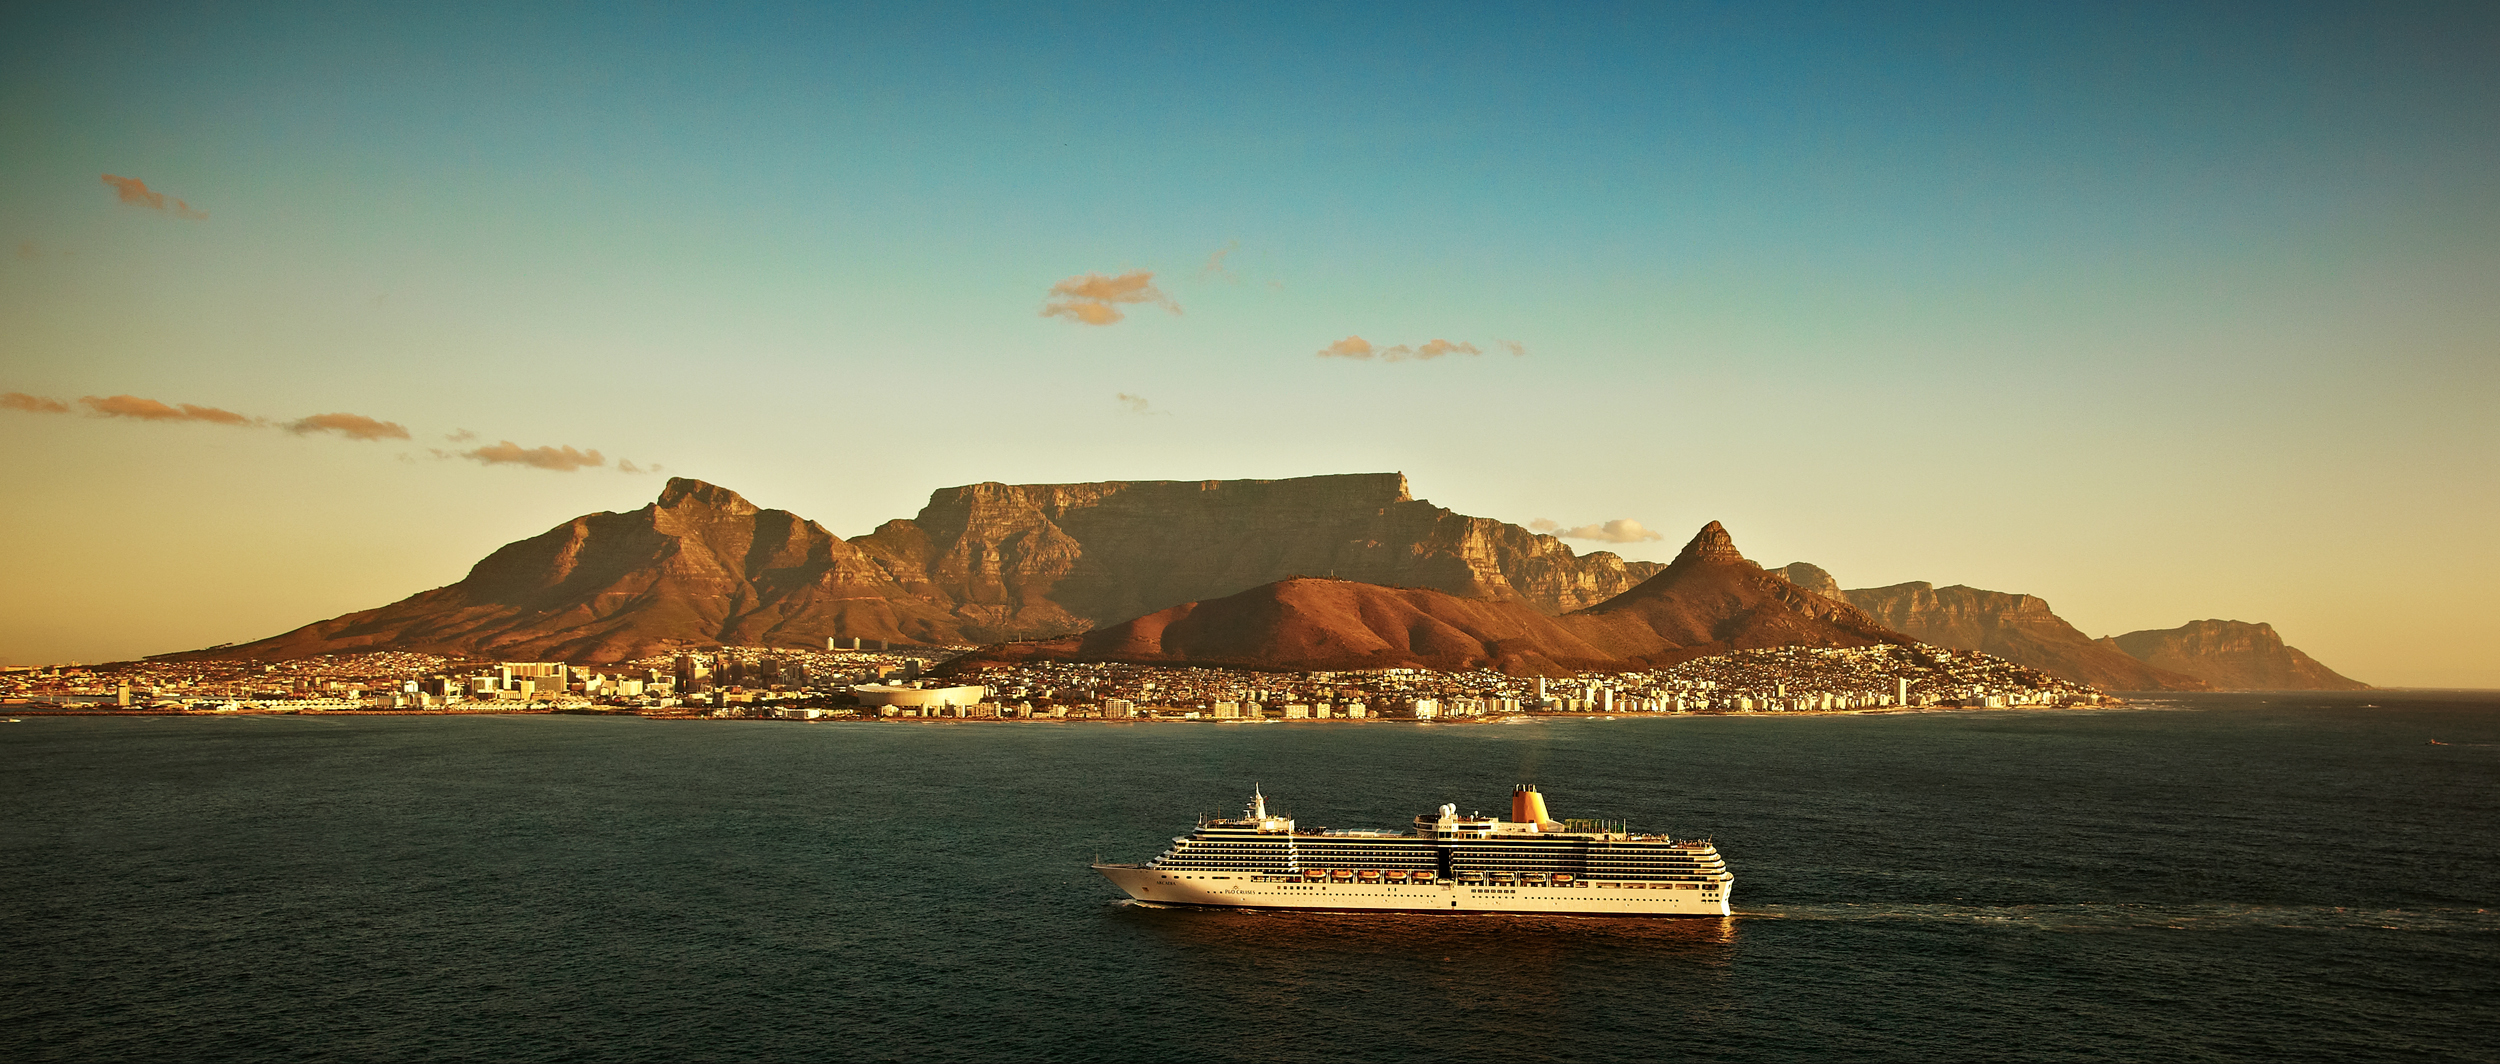 Capetown, South Africa, for P&O Cruises.  Aerial photography by Mike Caldwell